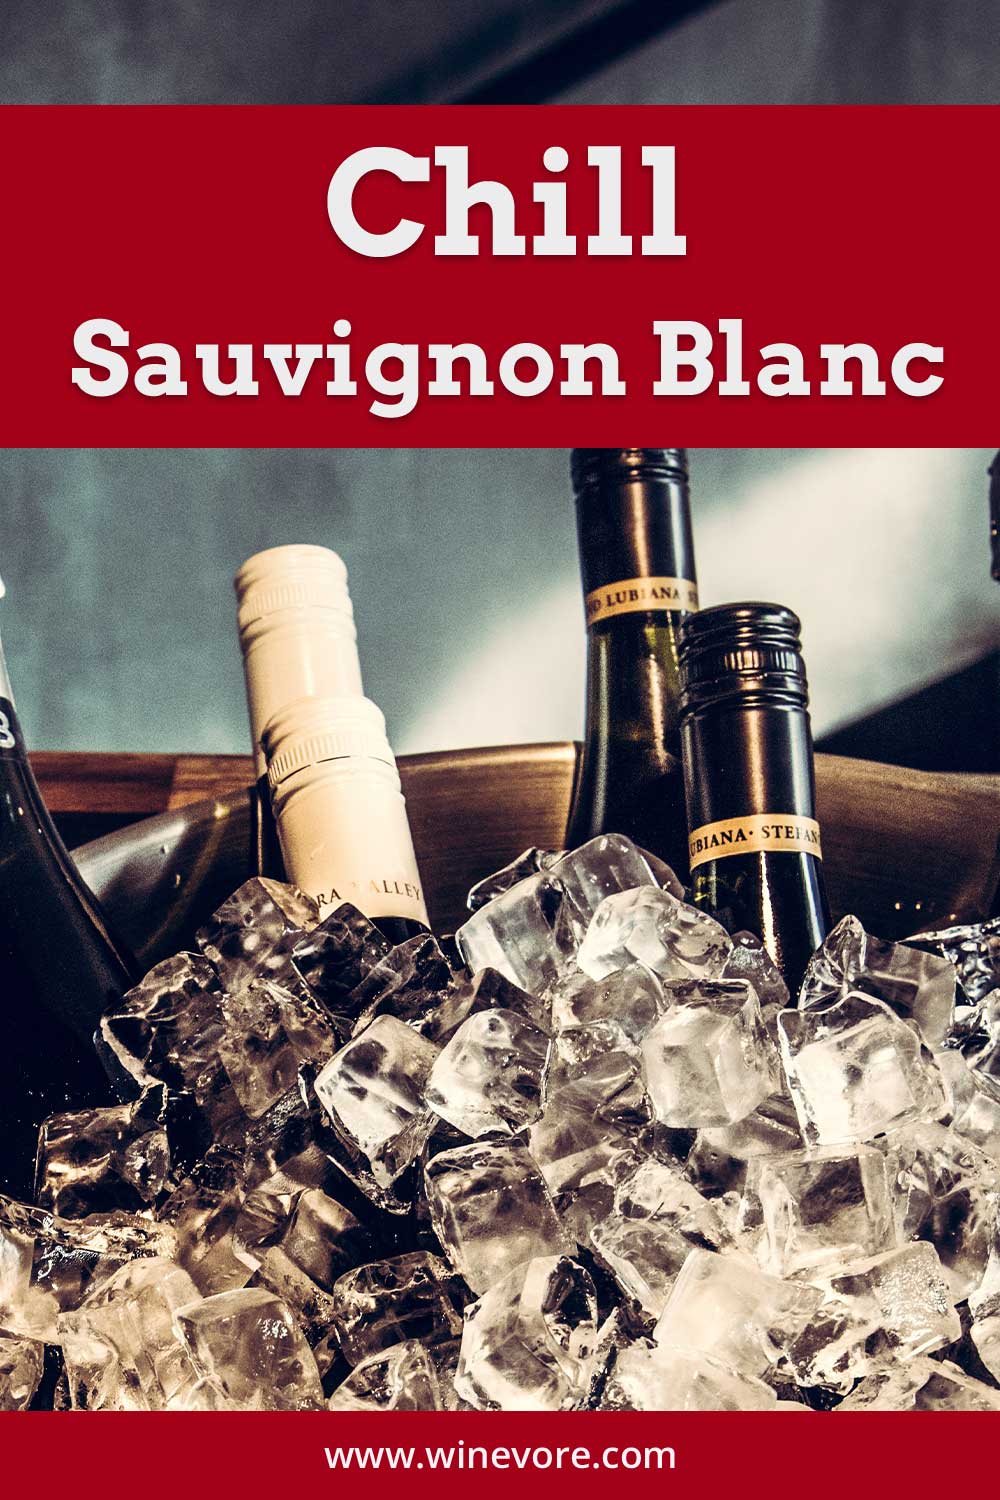 Some wine bottles deep in ice - Chill Sauvignon Blanc.